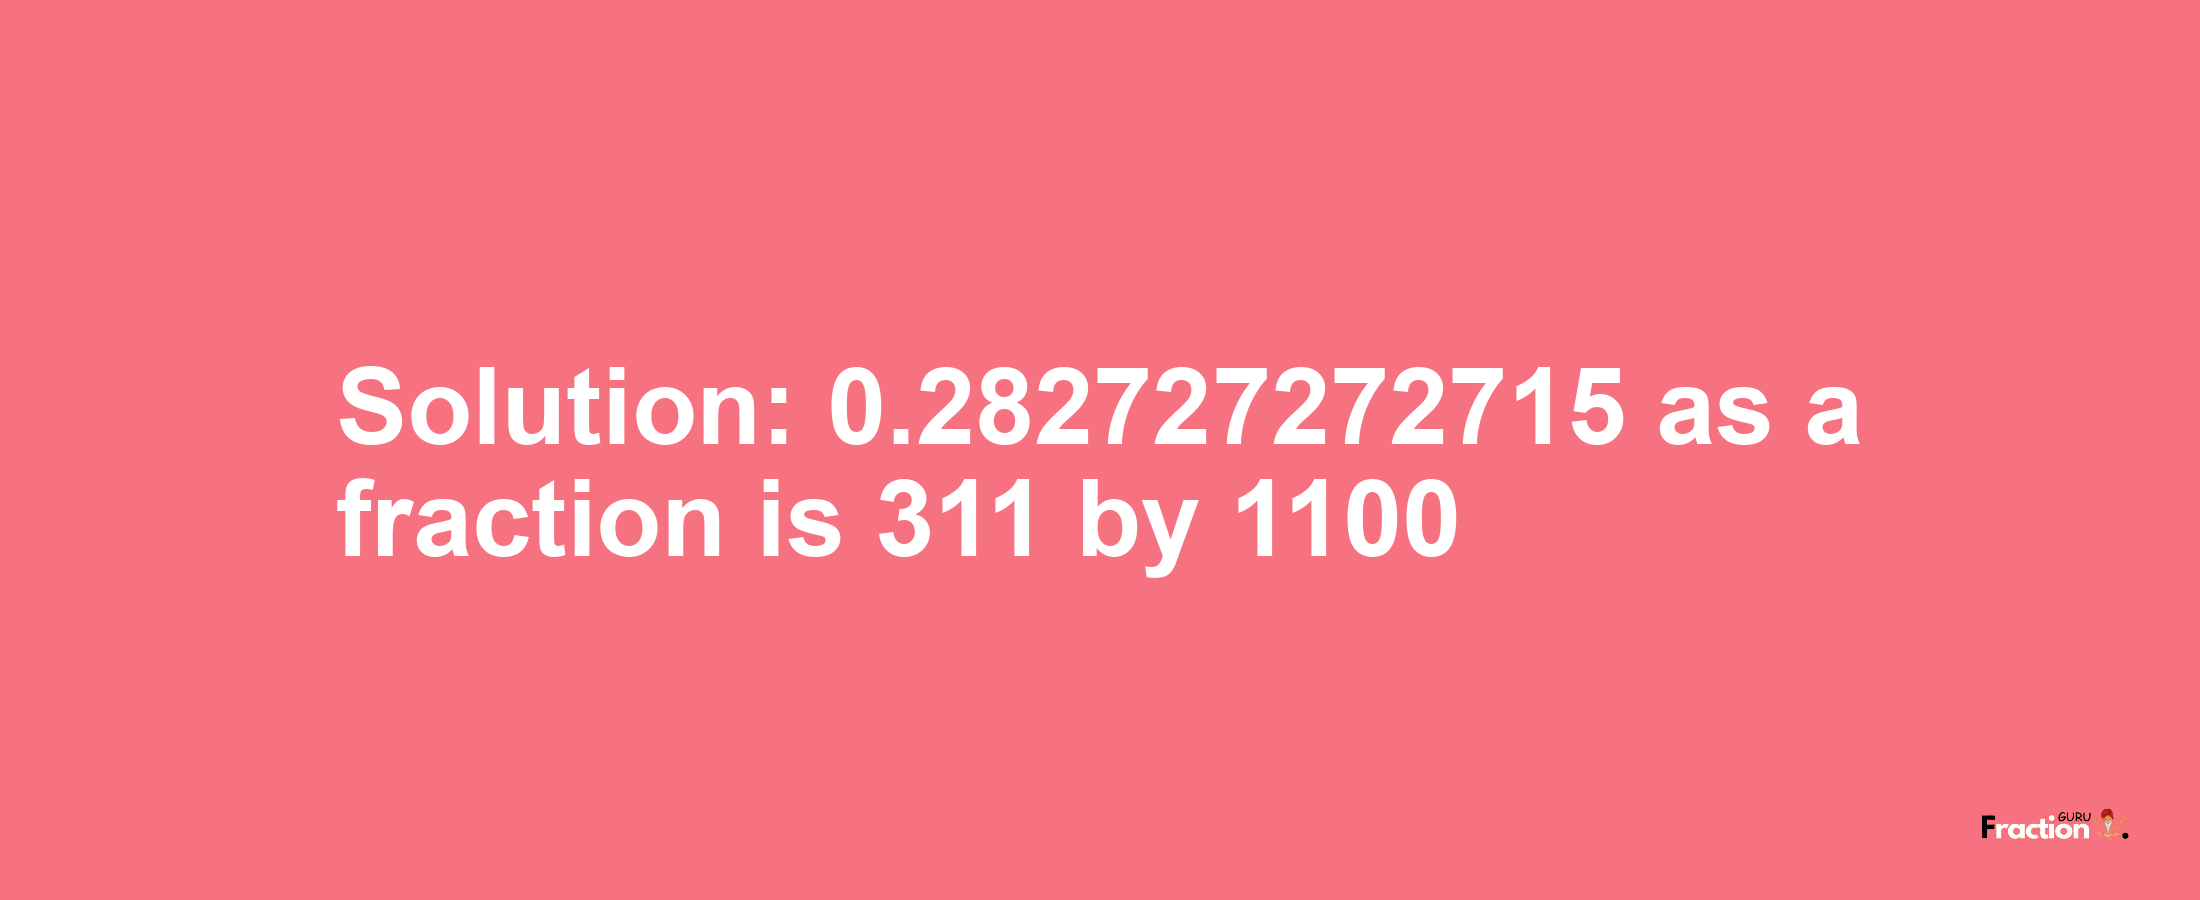 Solution:0.282727272715 as a fraction is 311/1100